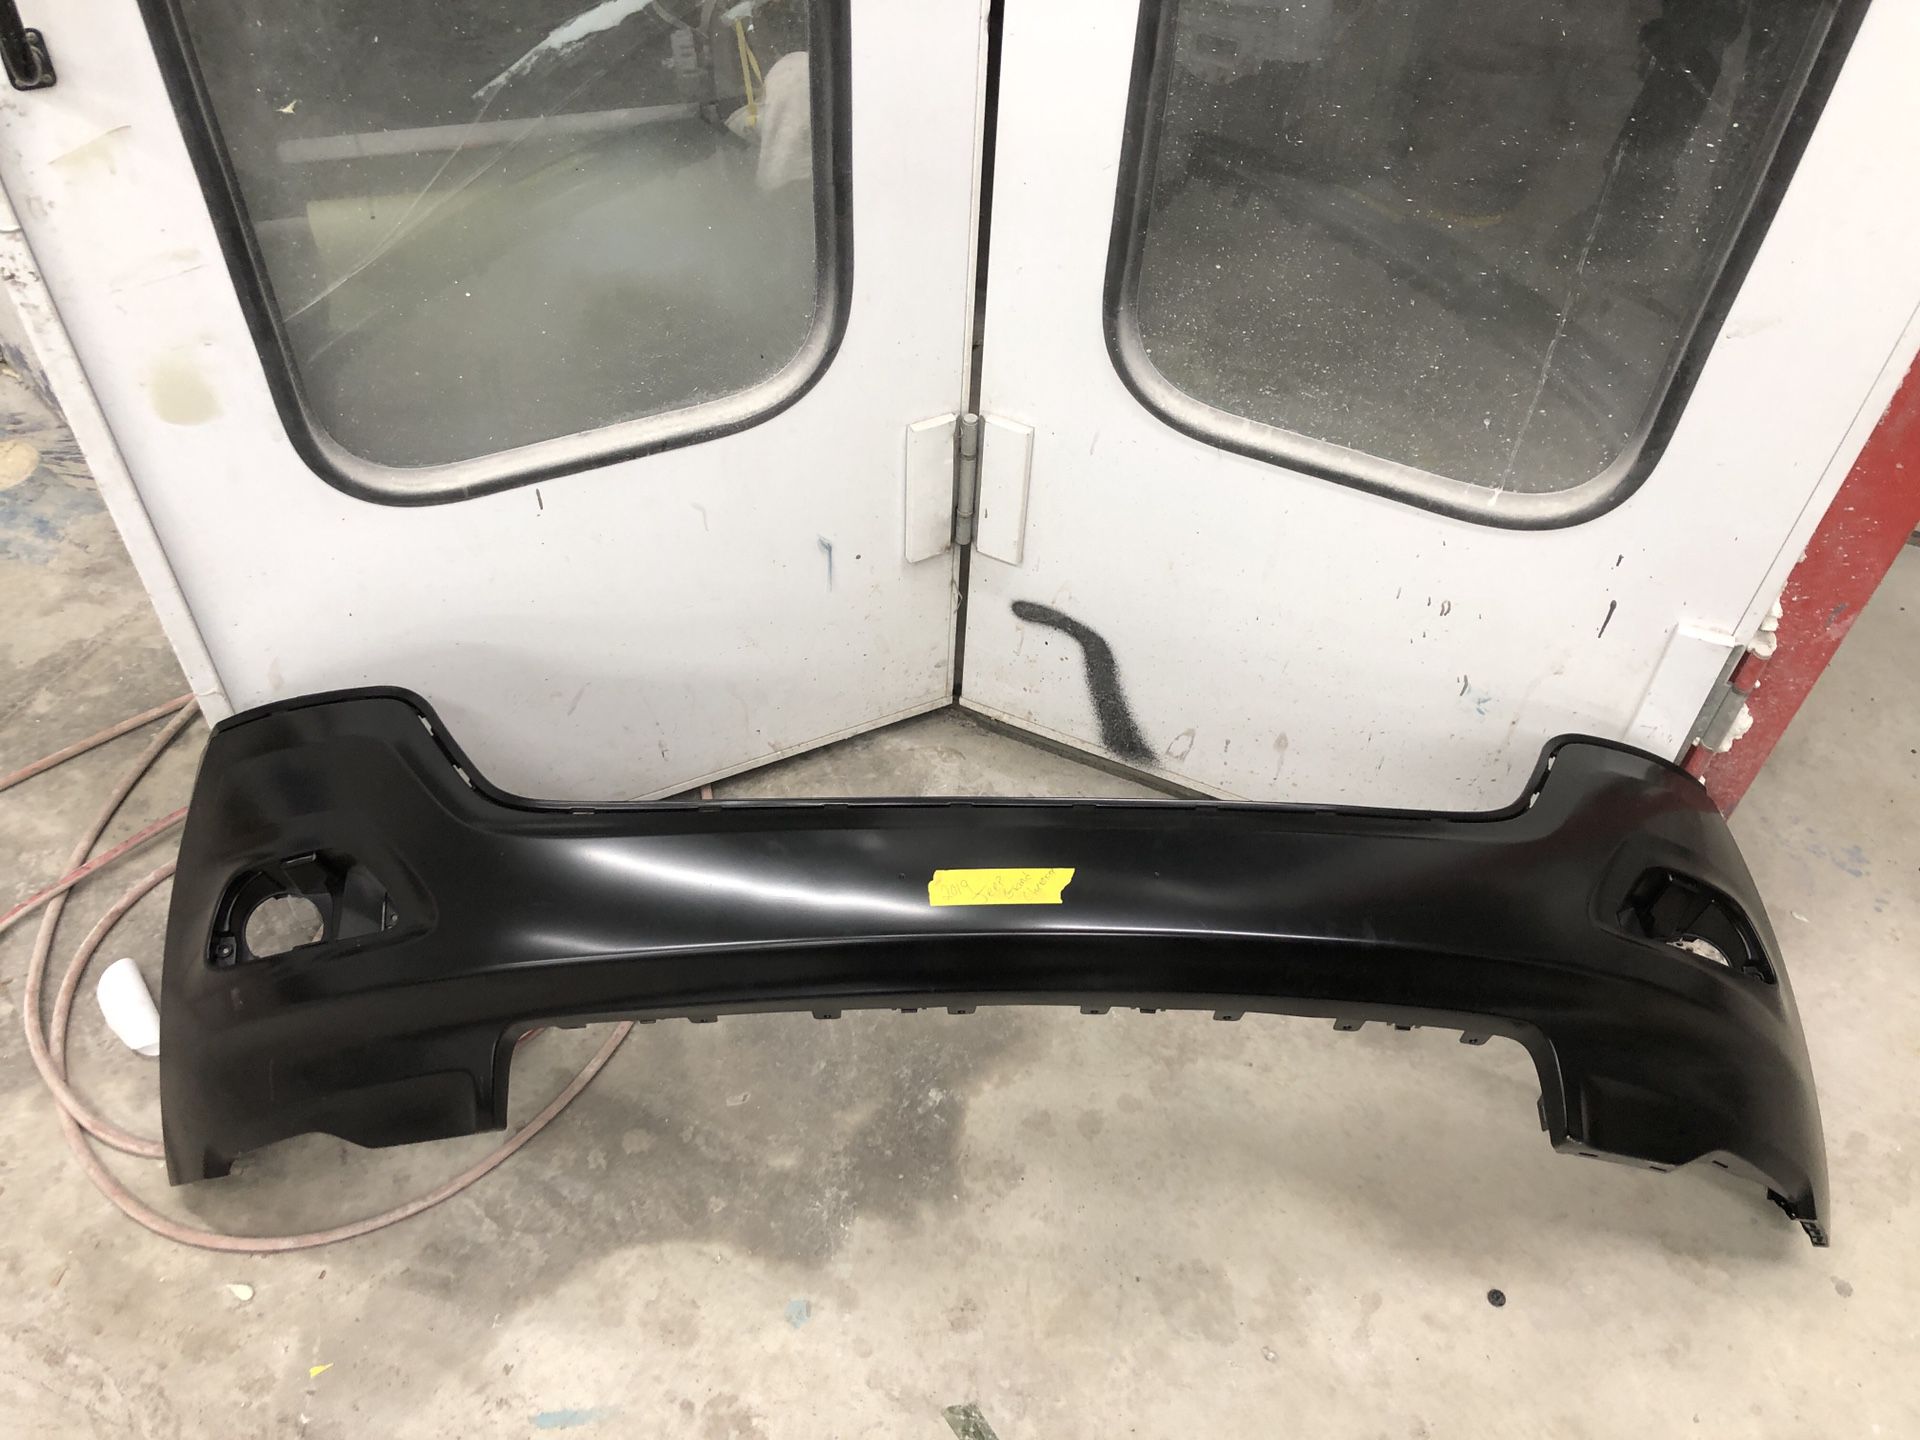 2019 Jeep Grand Cherokee front bumper cover